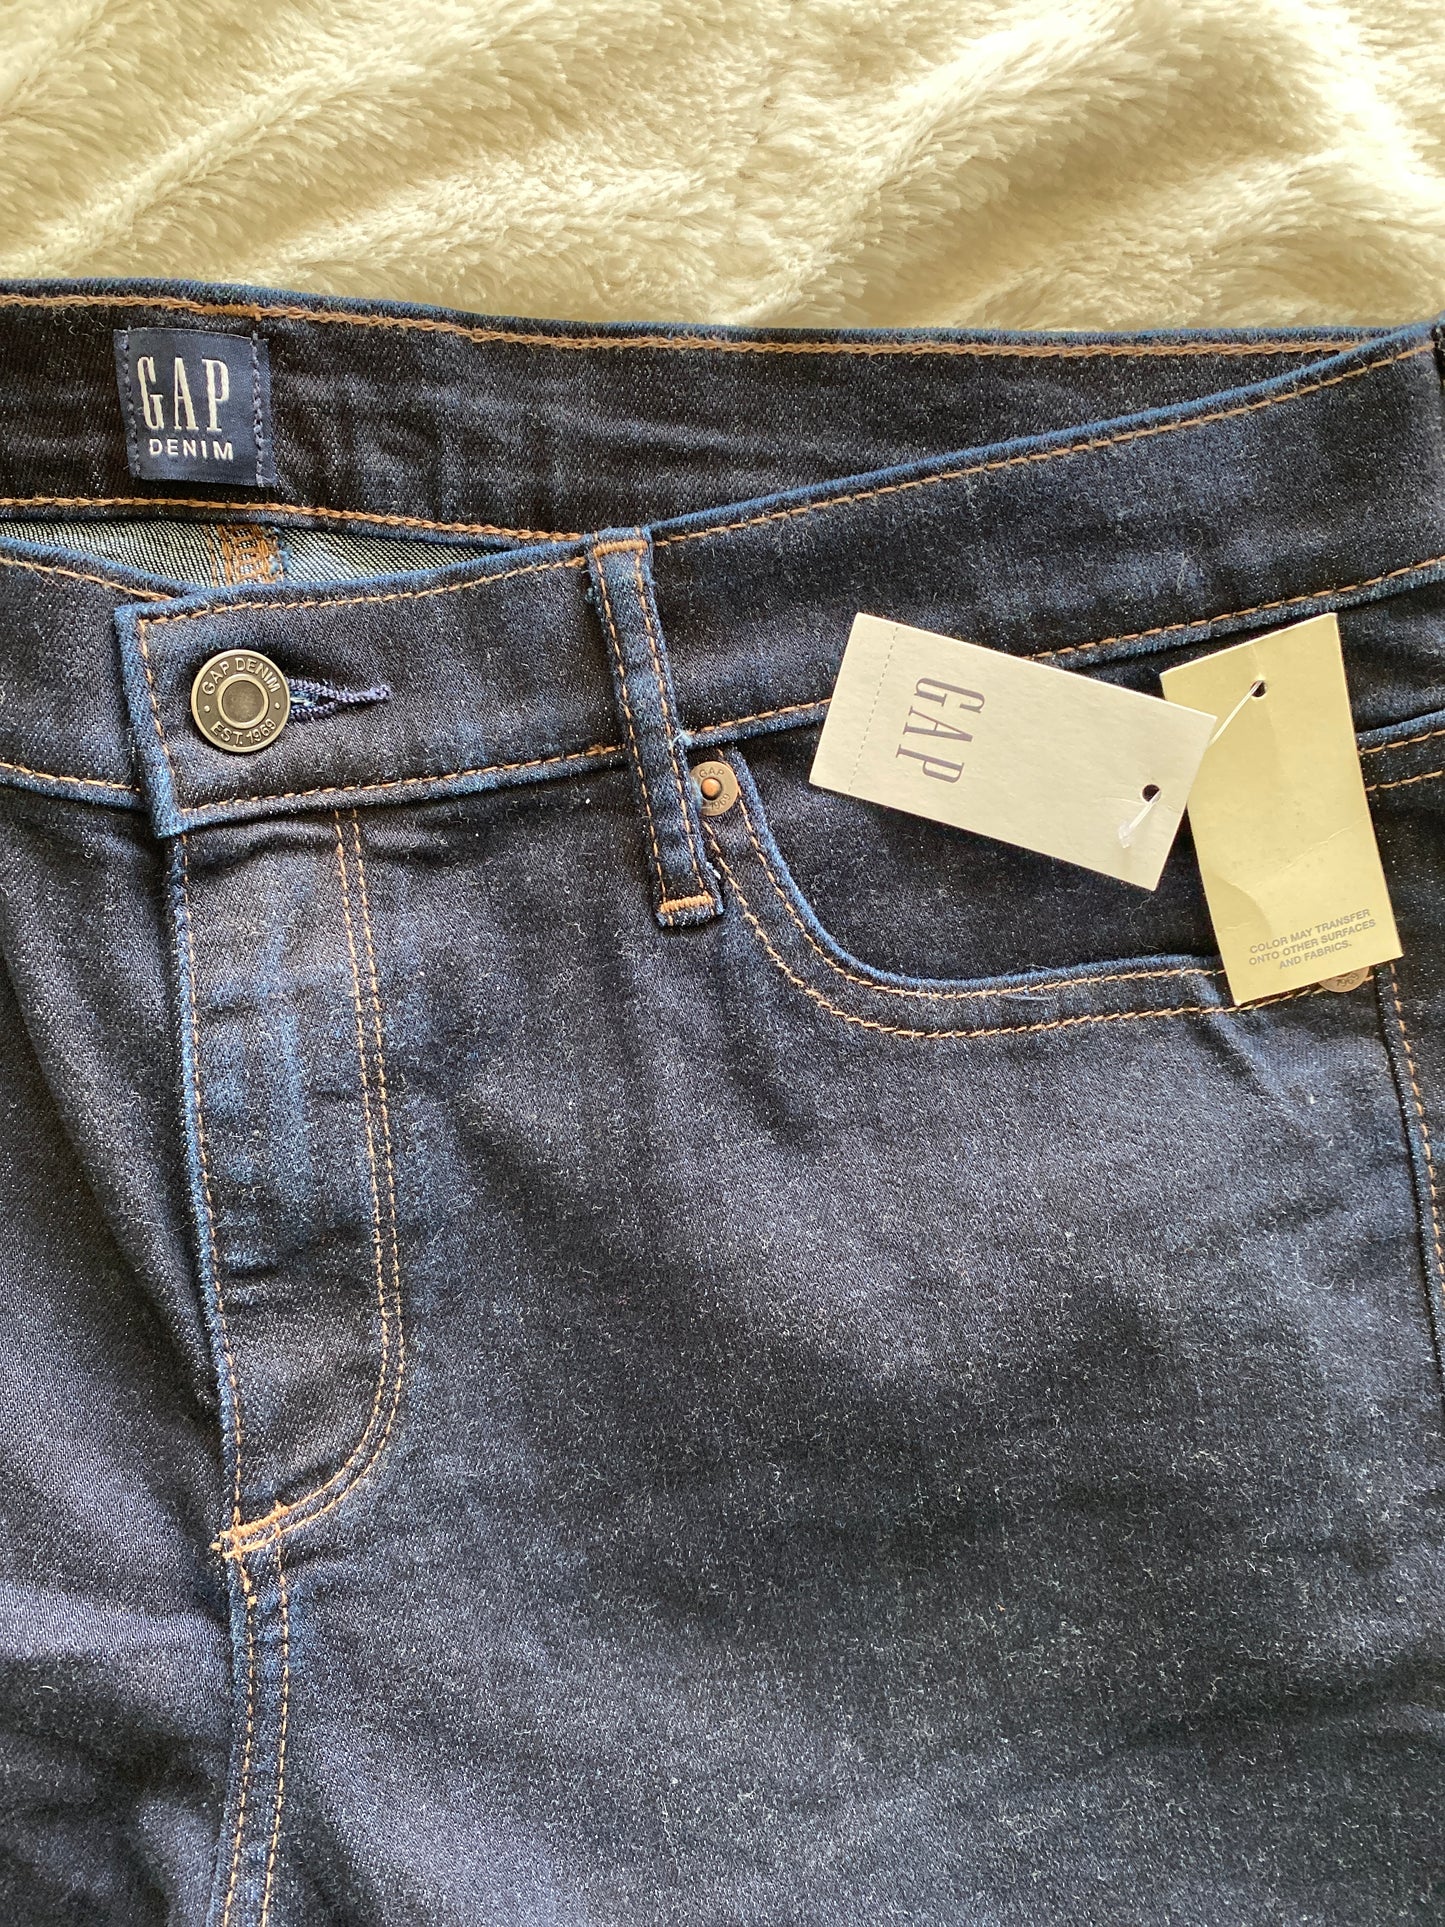 GAP women’s perfect boot jeans 32R NWT